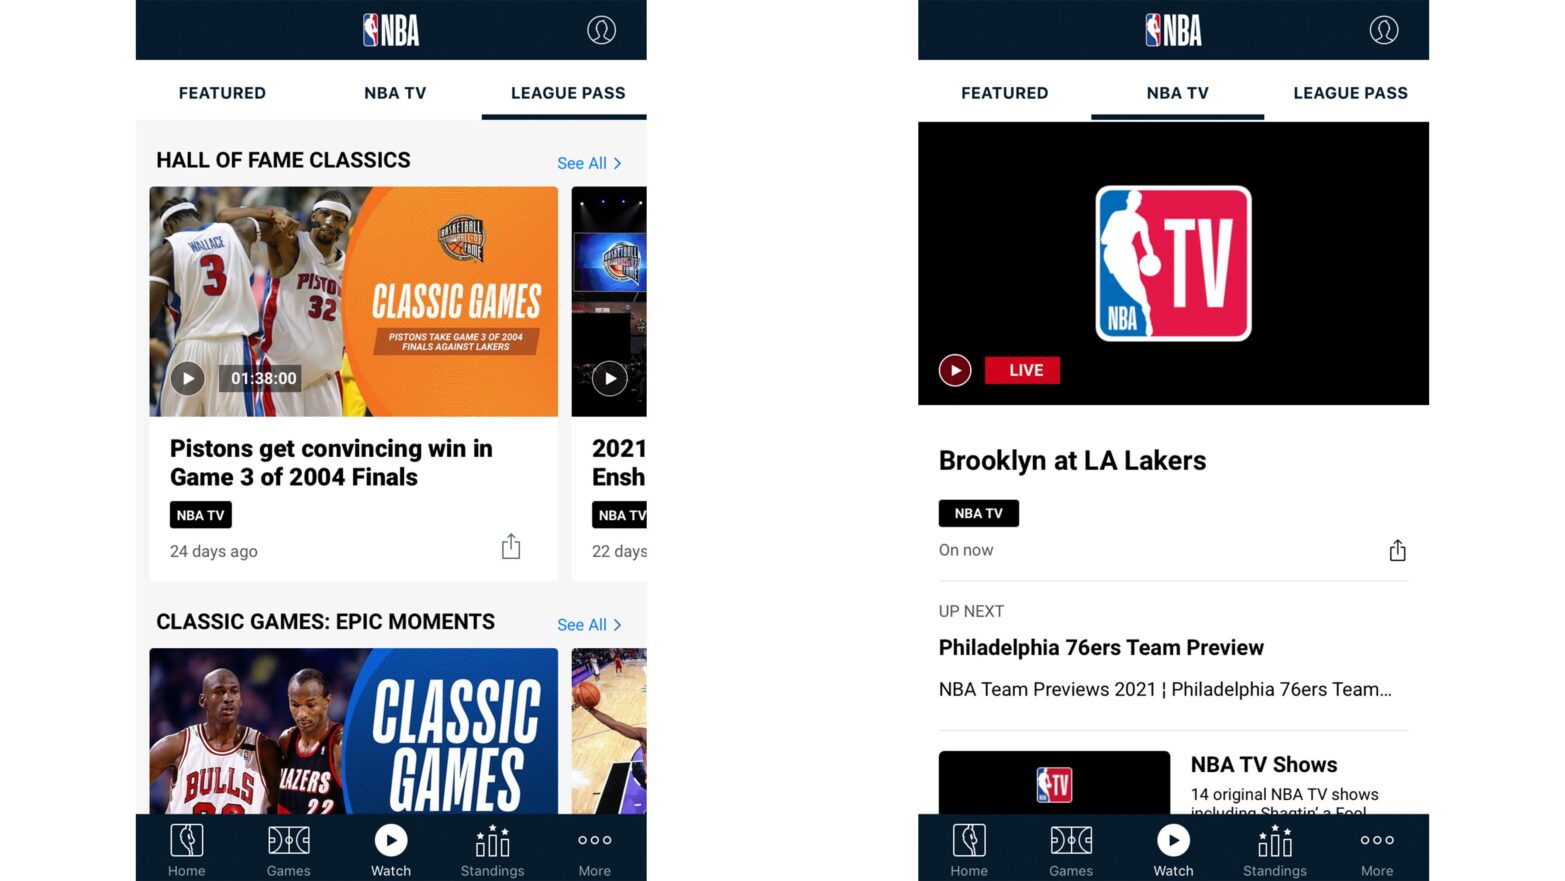 A side-by-side view of the NBA League Pass and NBA TV tabs in the NBA mobile app.